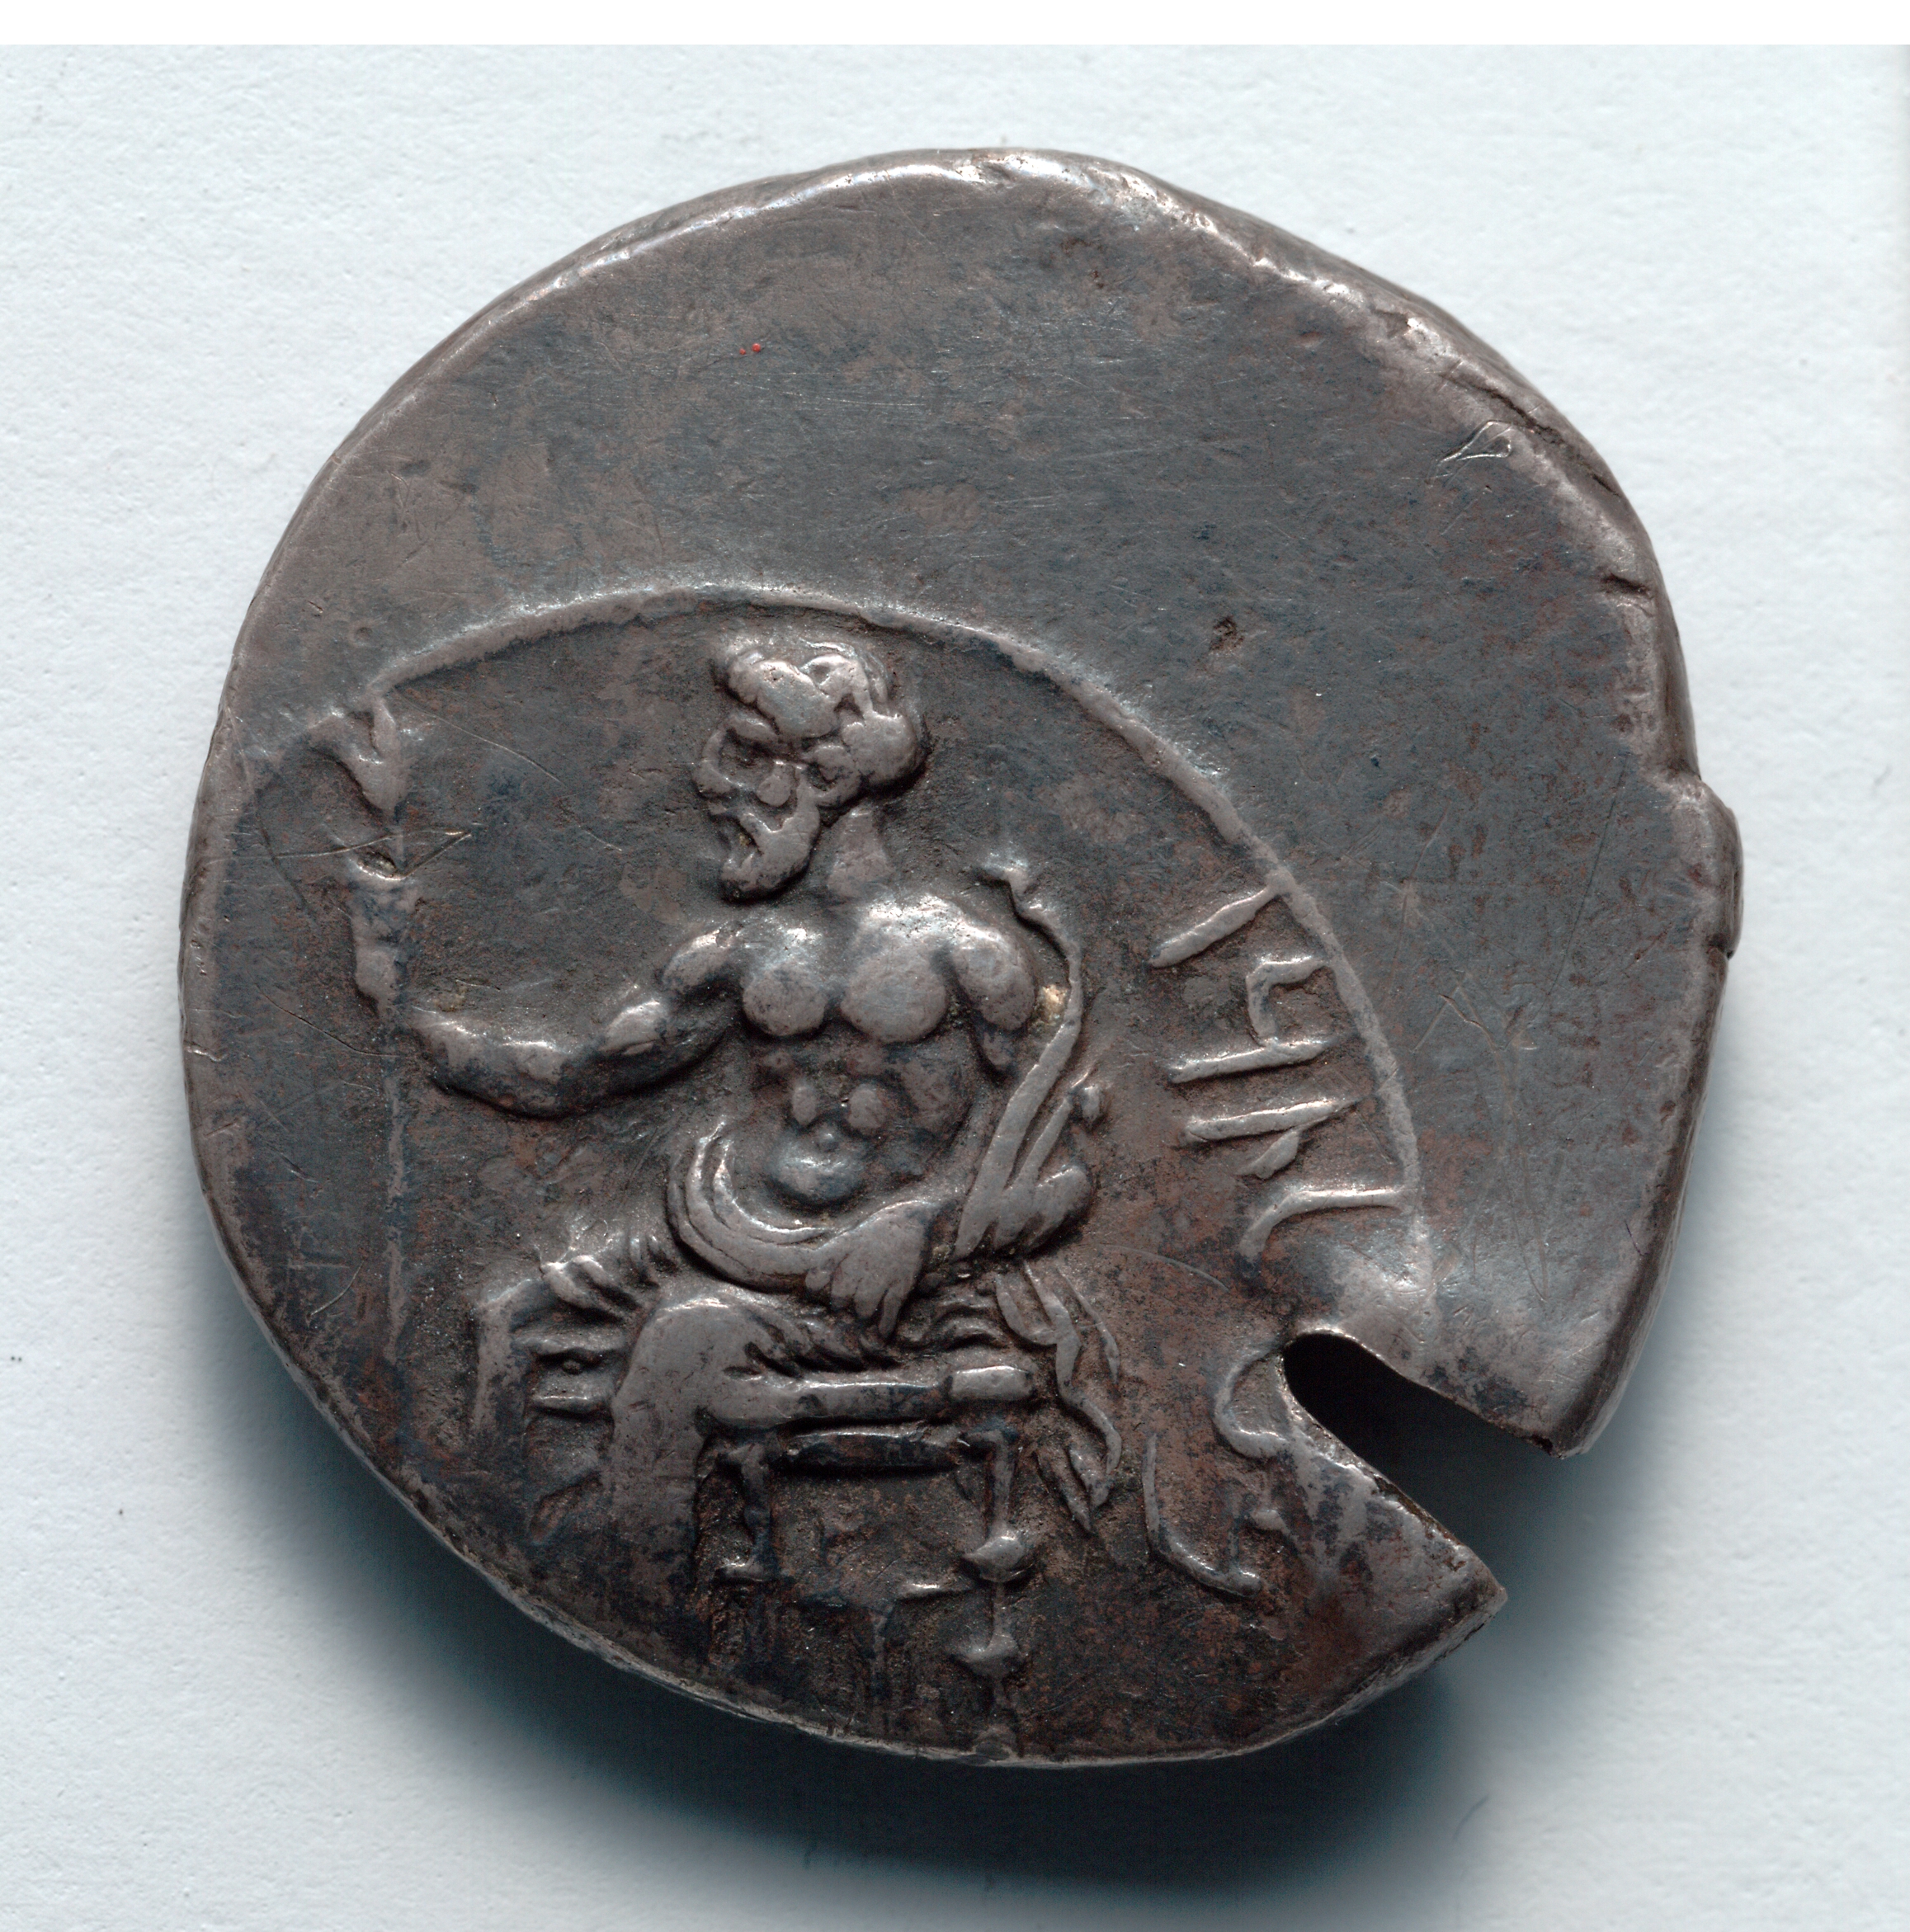 Stater: Ba'al, Seated with Scepter, within Circle (obverse)